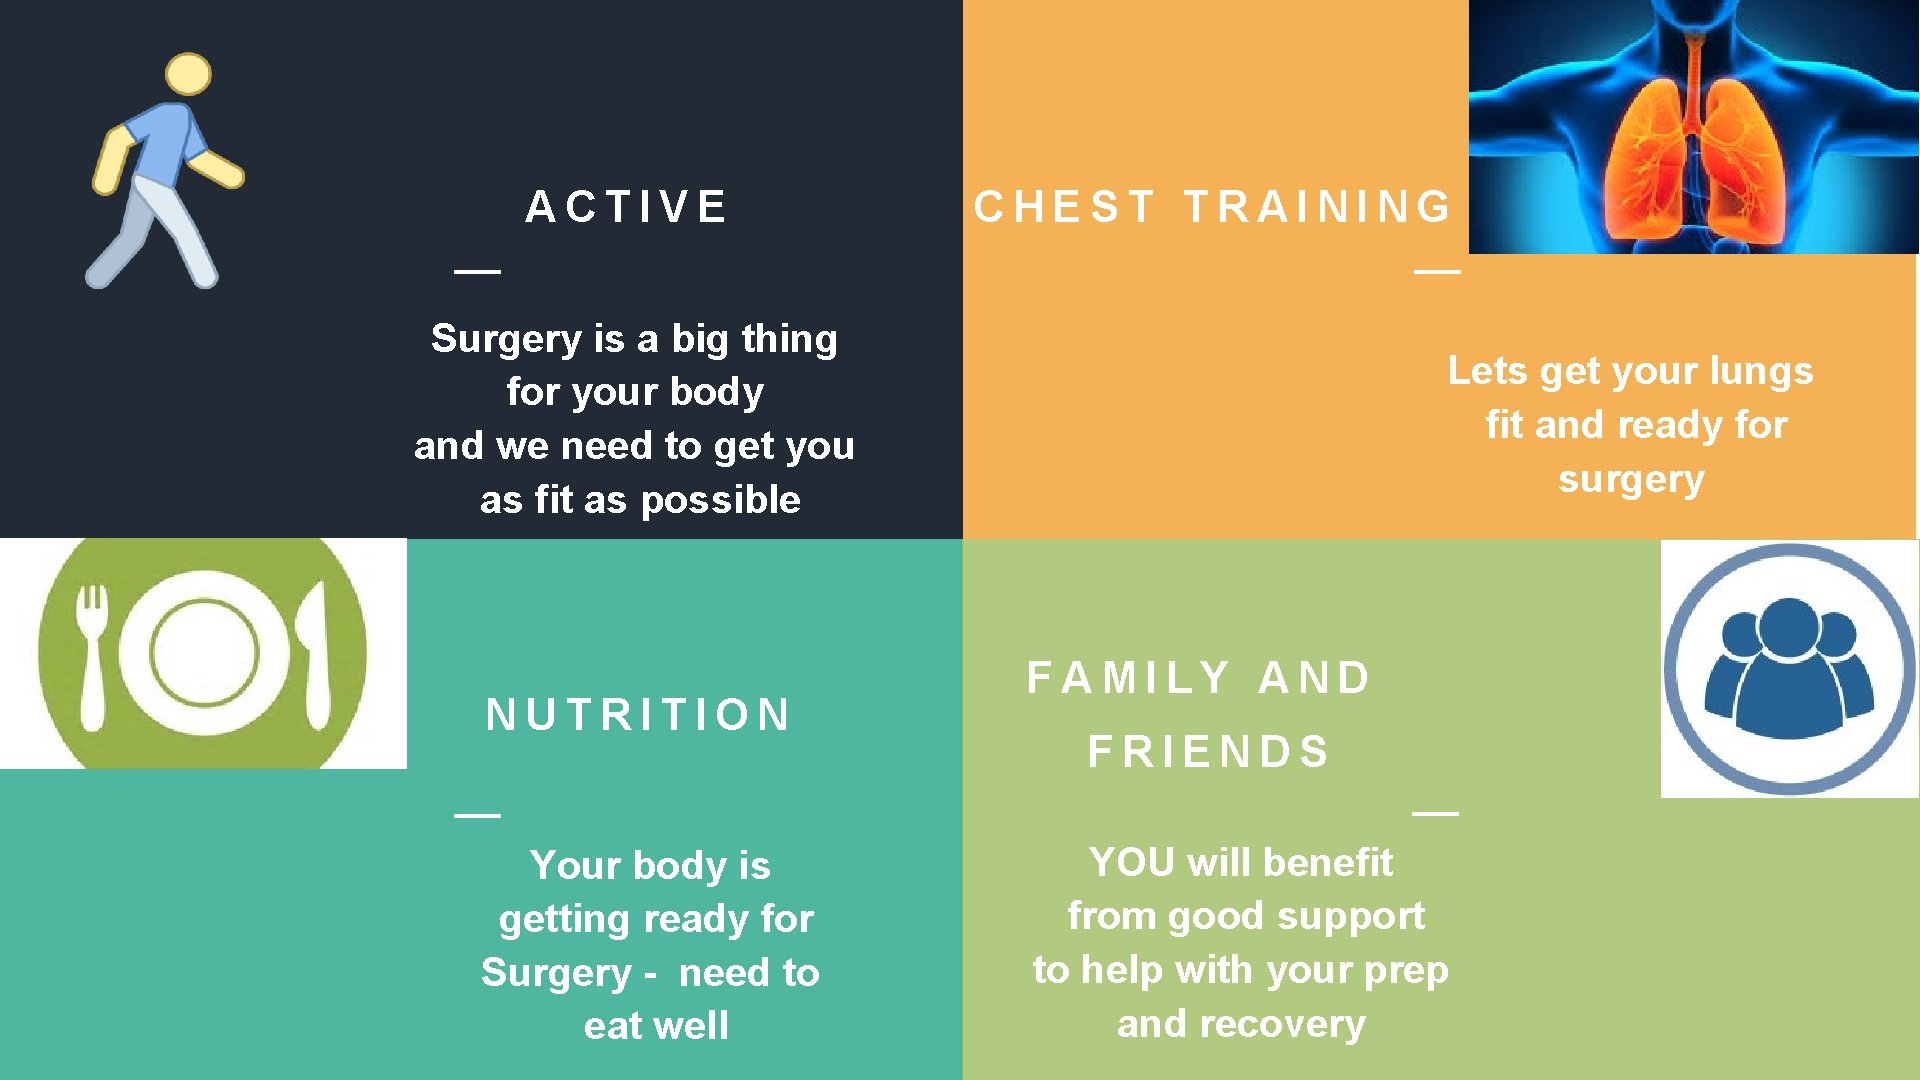 ACTIVE CHEST TRAINING Surgery is a big thing for your body and we need